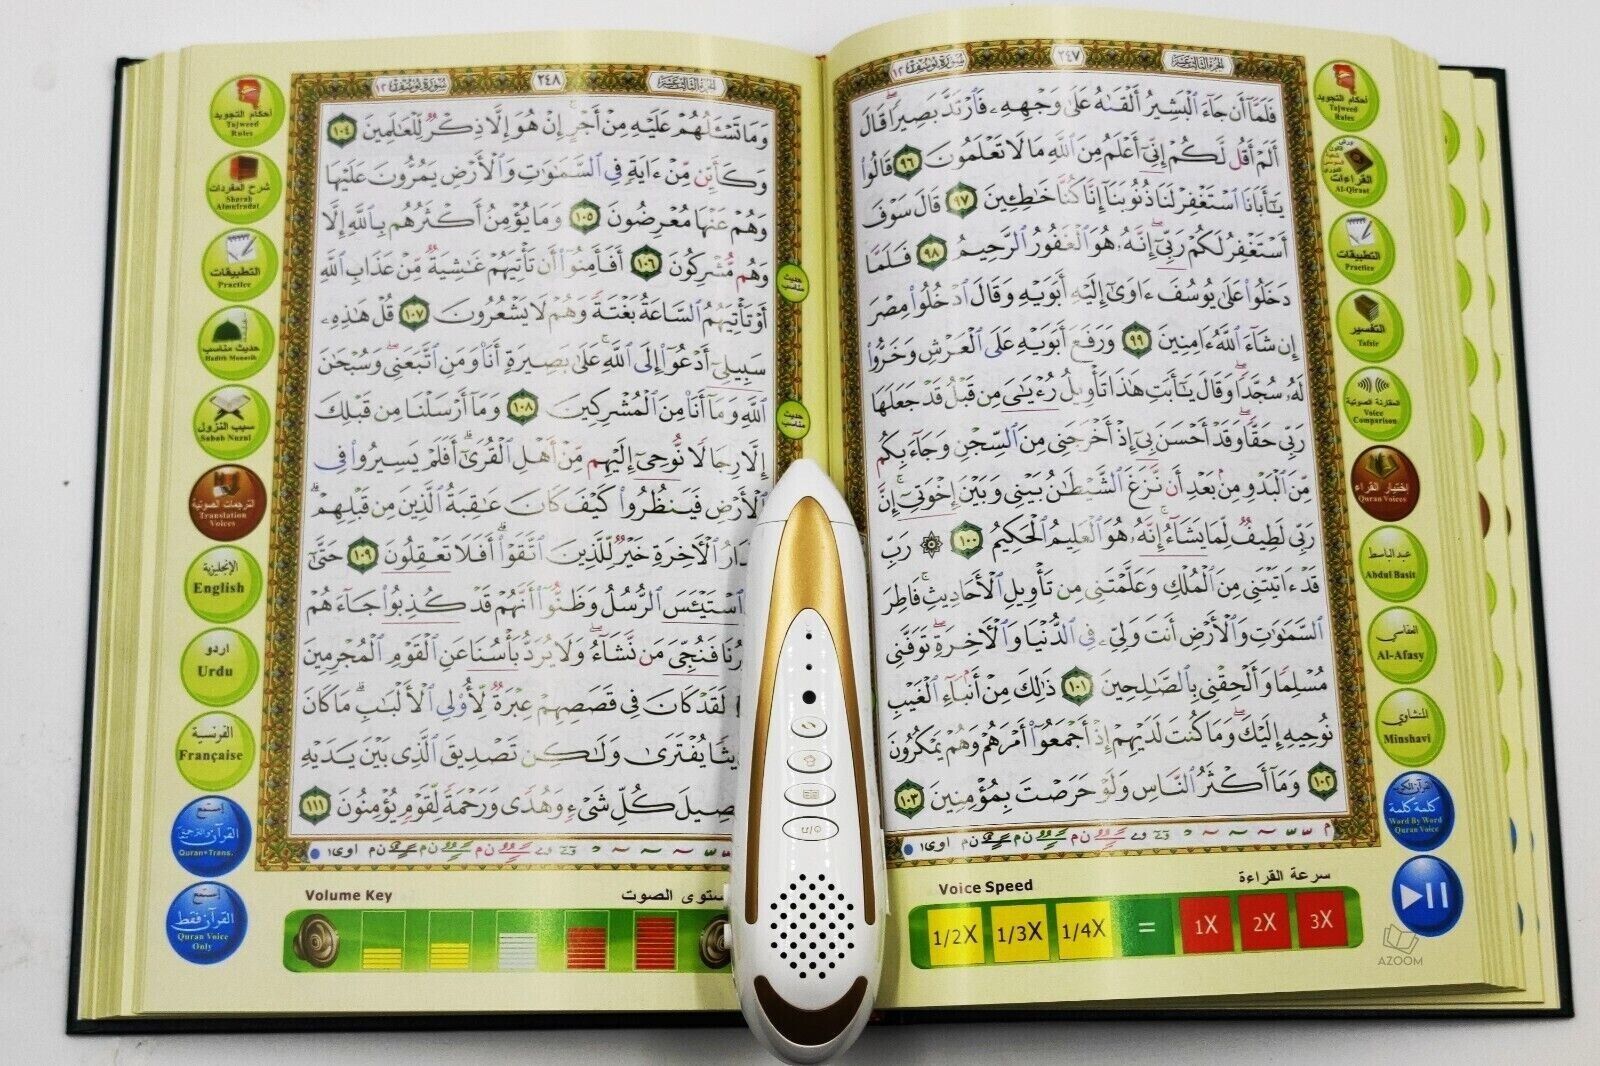 Digital Quran Pen Reader in Alloy Case - Small Size Colour Coded Quran (Small)